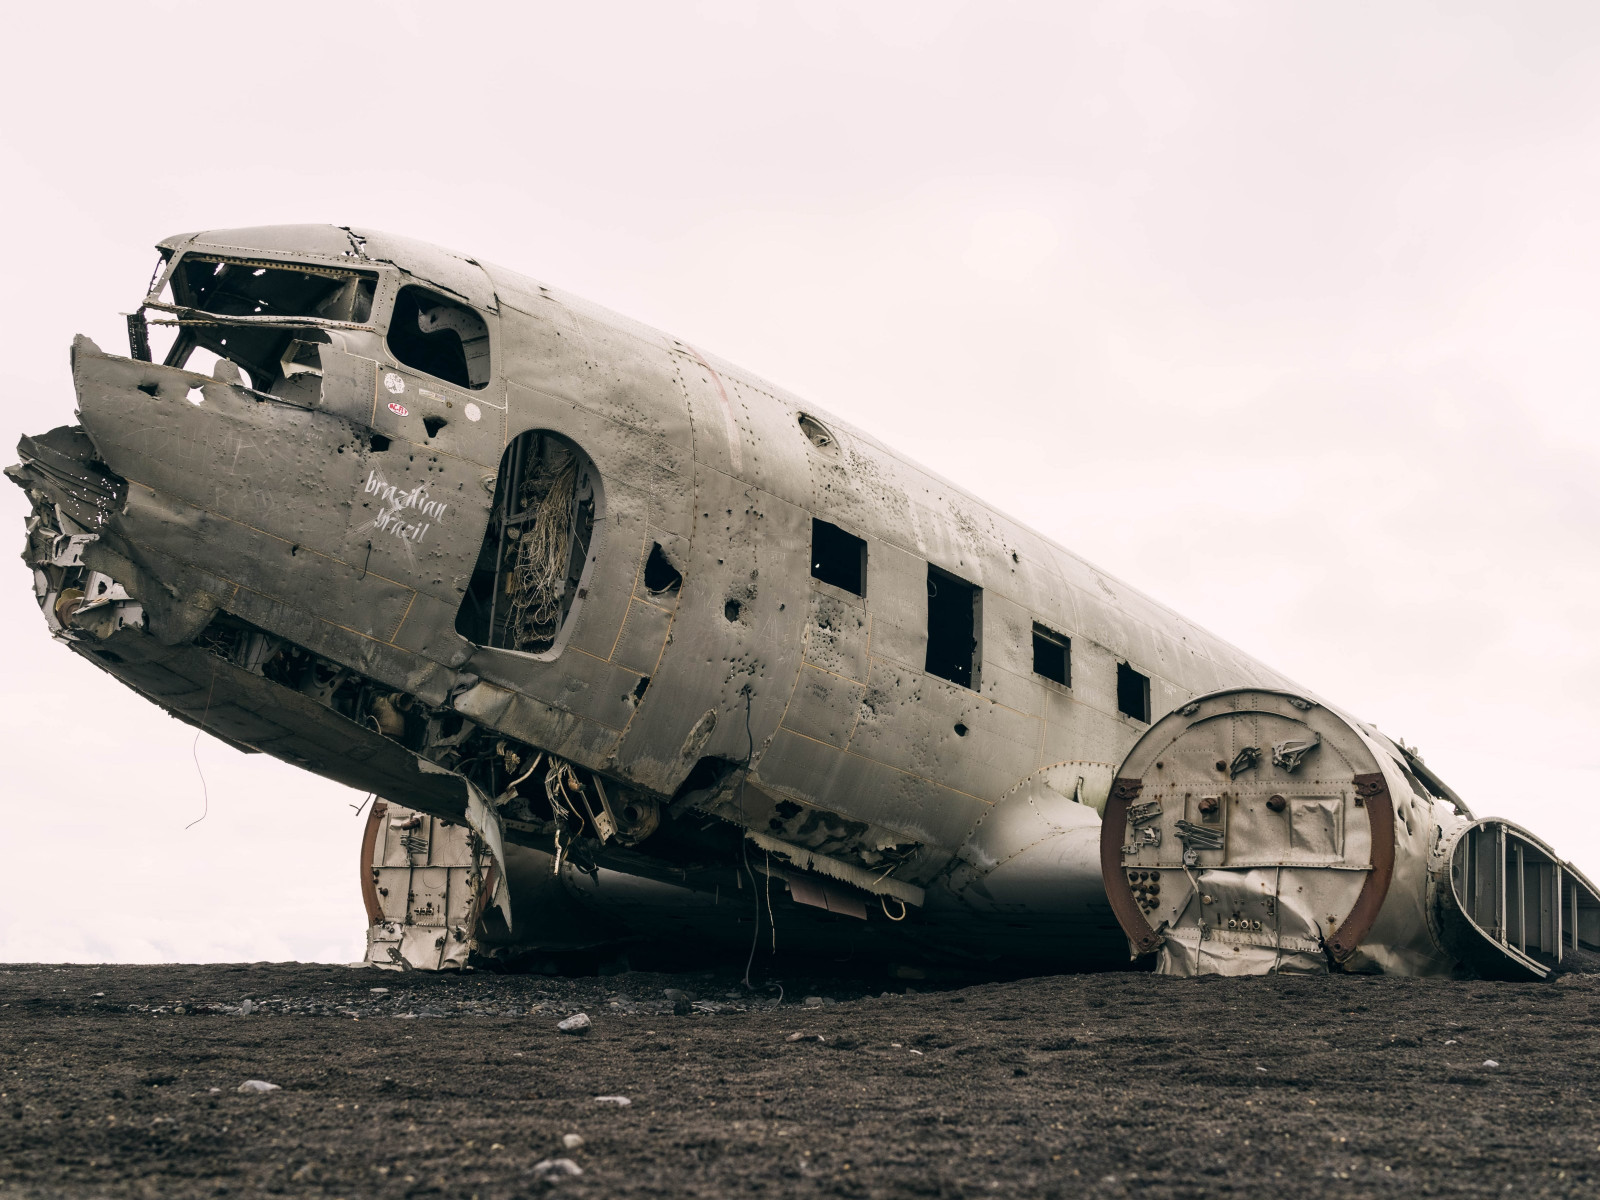 Wrecked airplane wallpaper 1600x1200